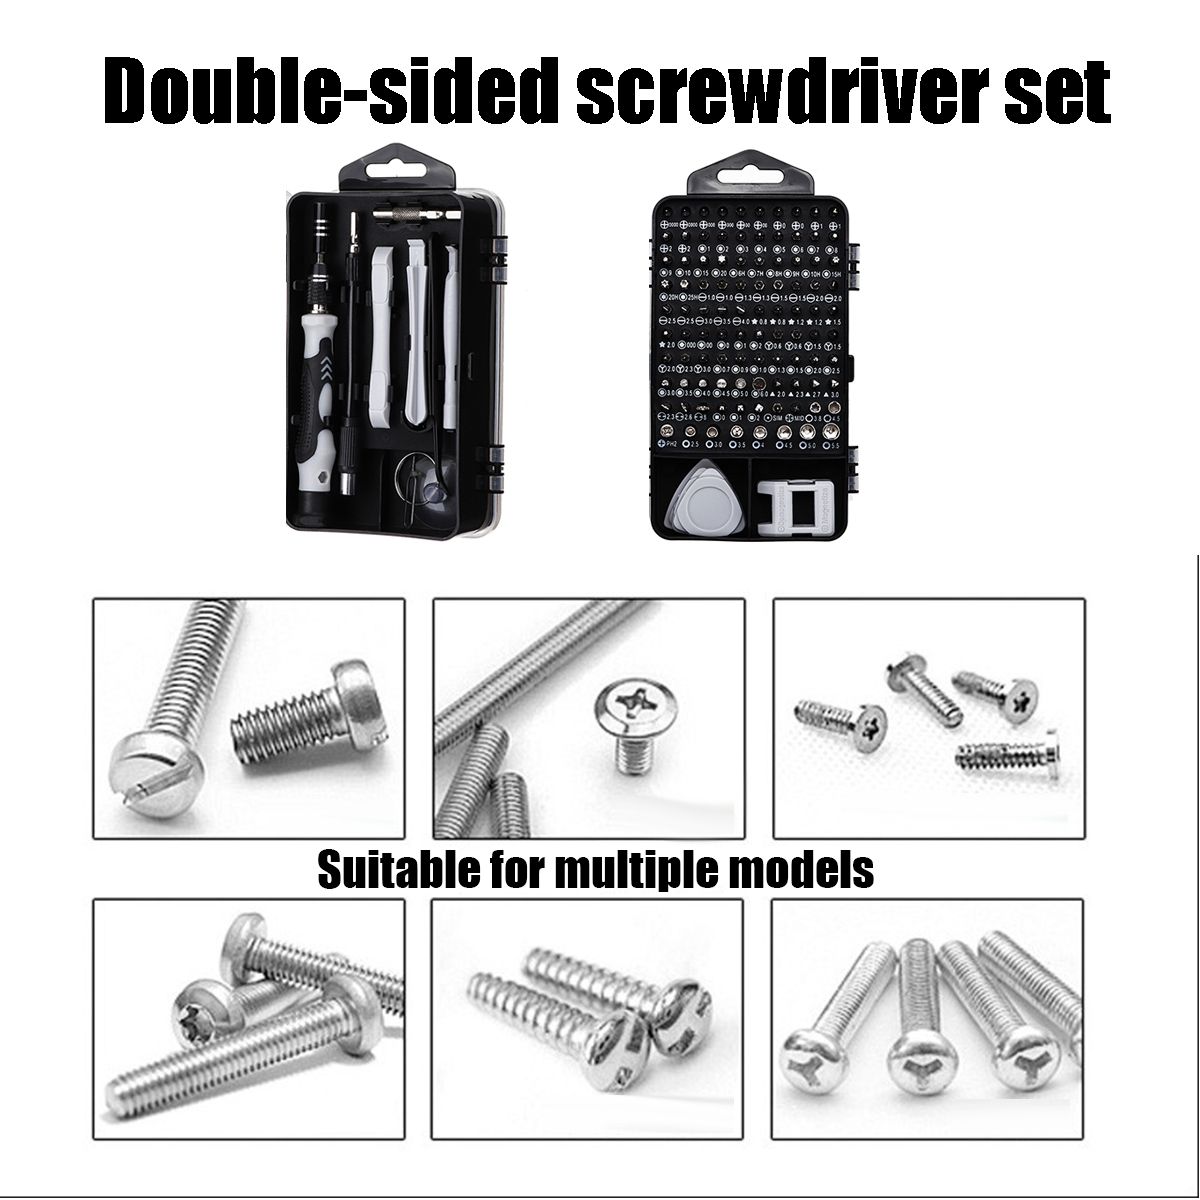 Precision-Screwdriver-Kit-116-in-1-with-Bits-Screwdrivers-Magnetic-Driver-Kit-with-Flexible-Shaft-Ex-1608392